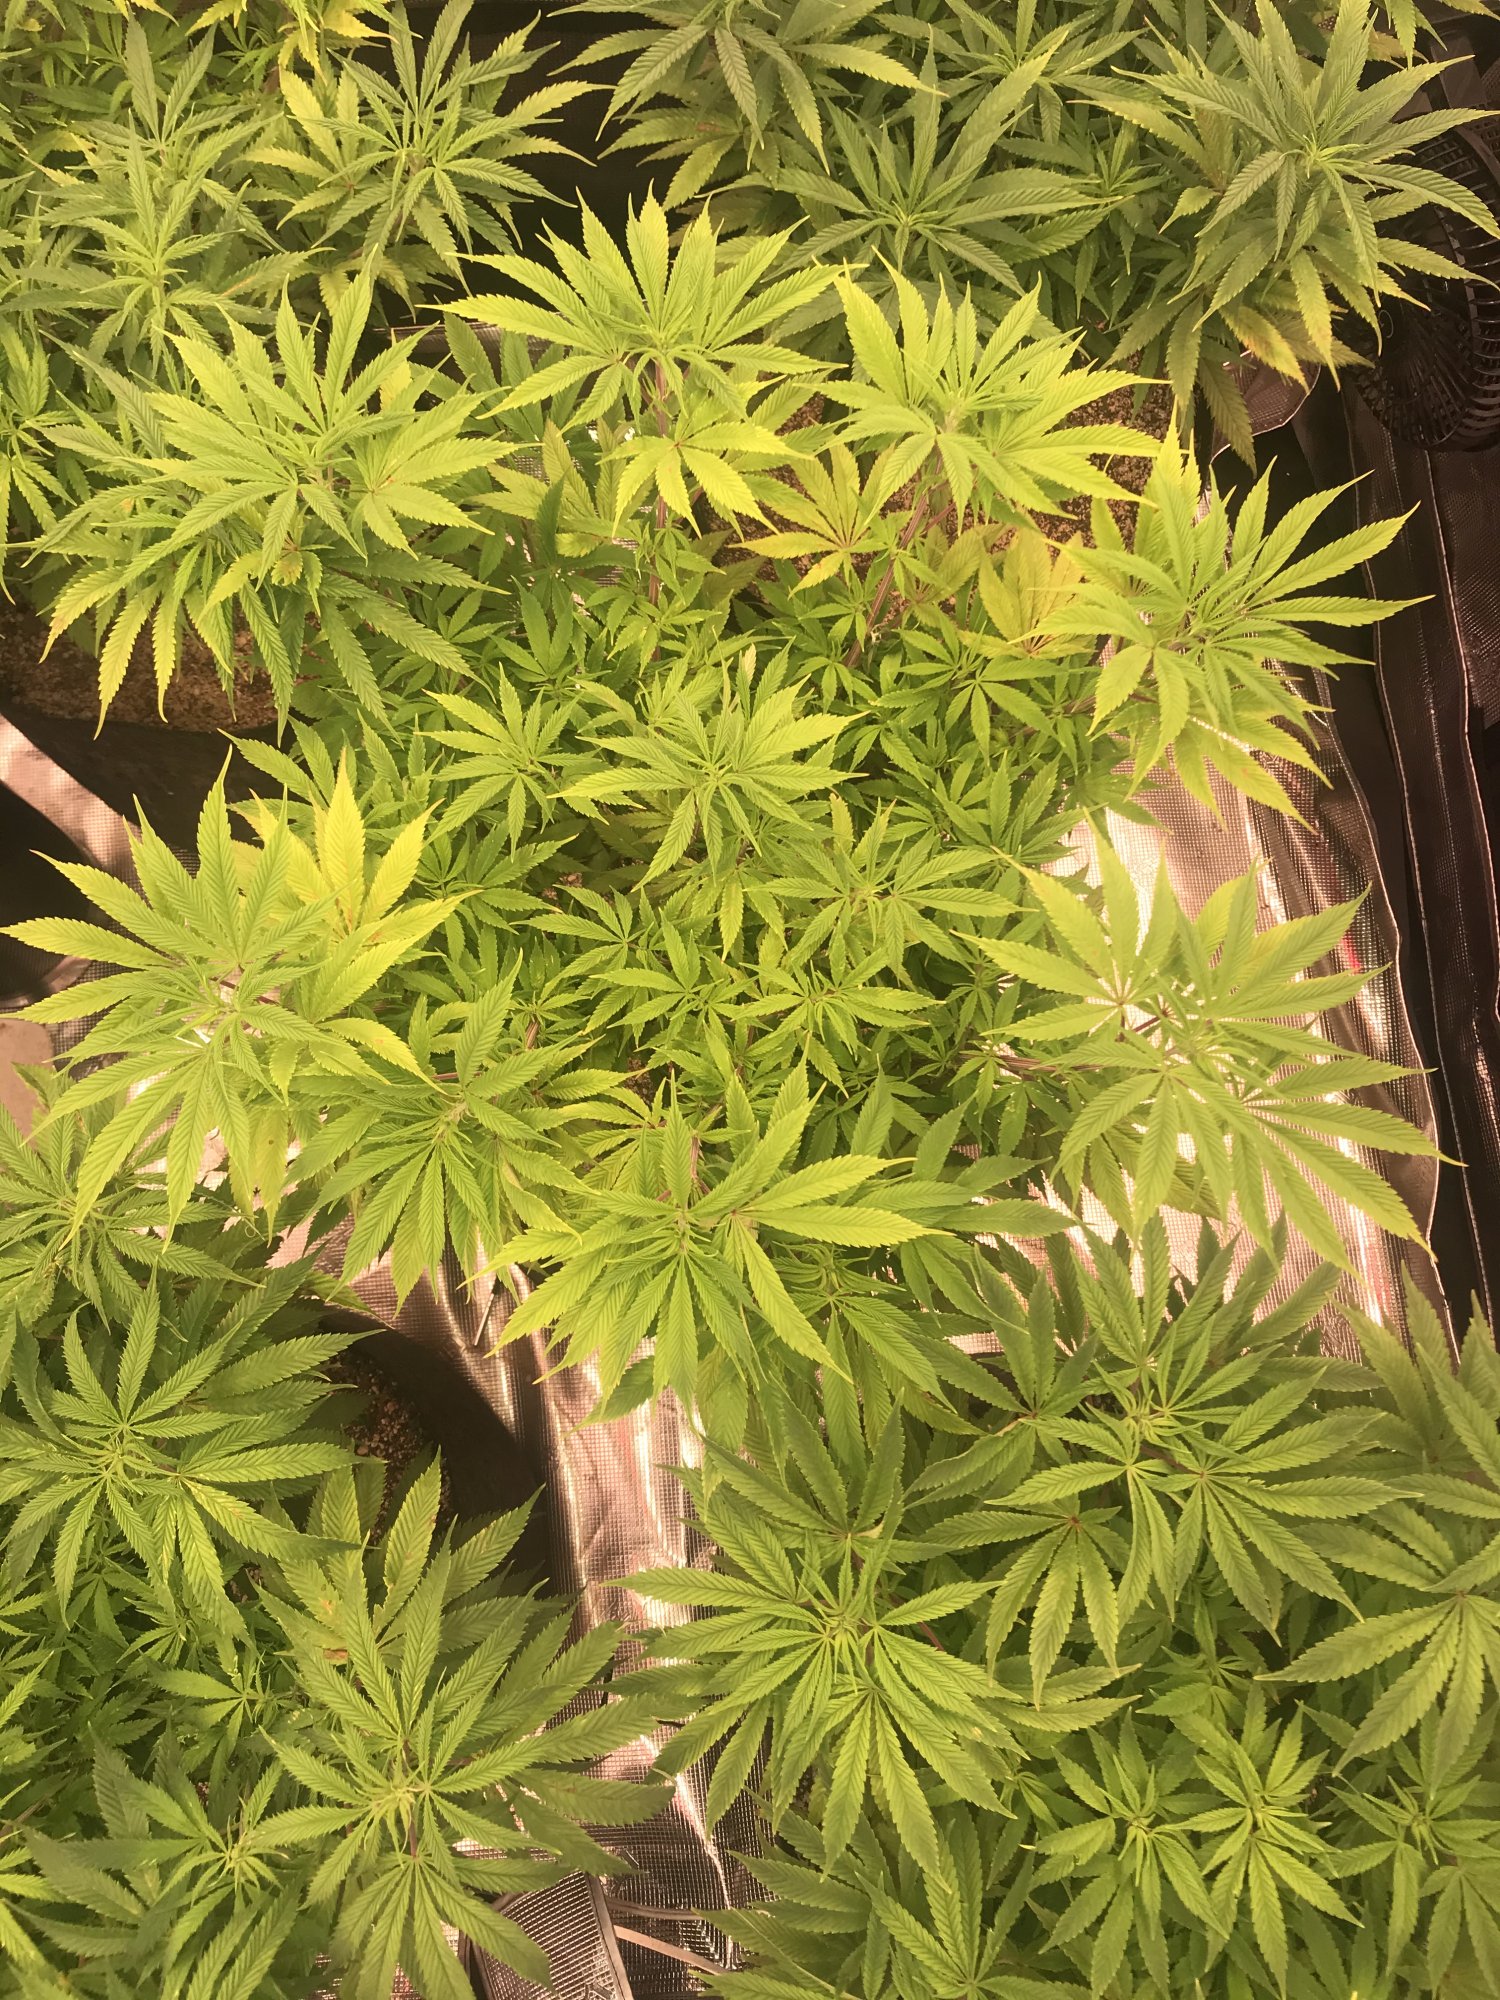 Help nutrient issue diagnosis needed 5